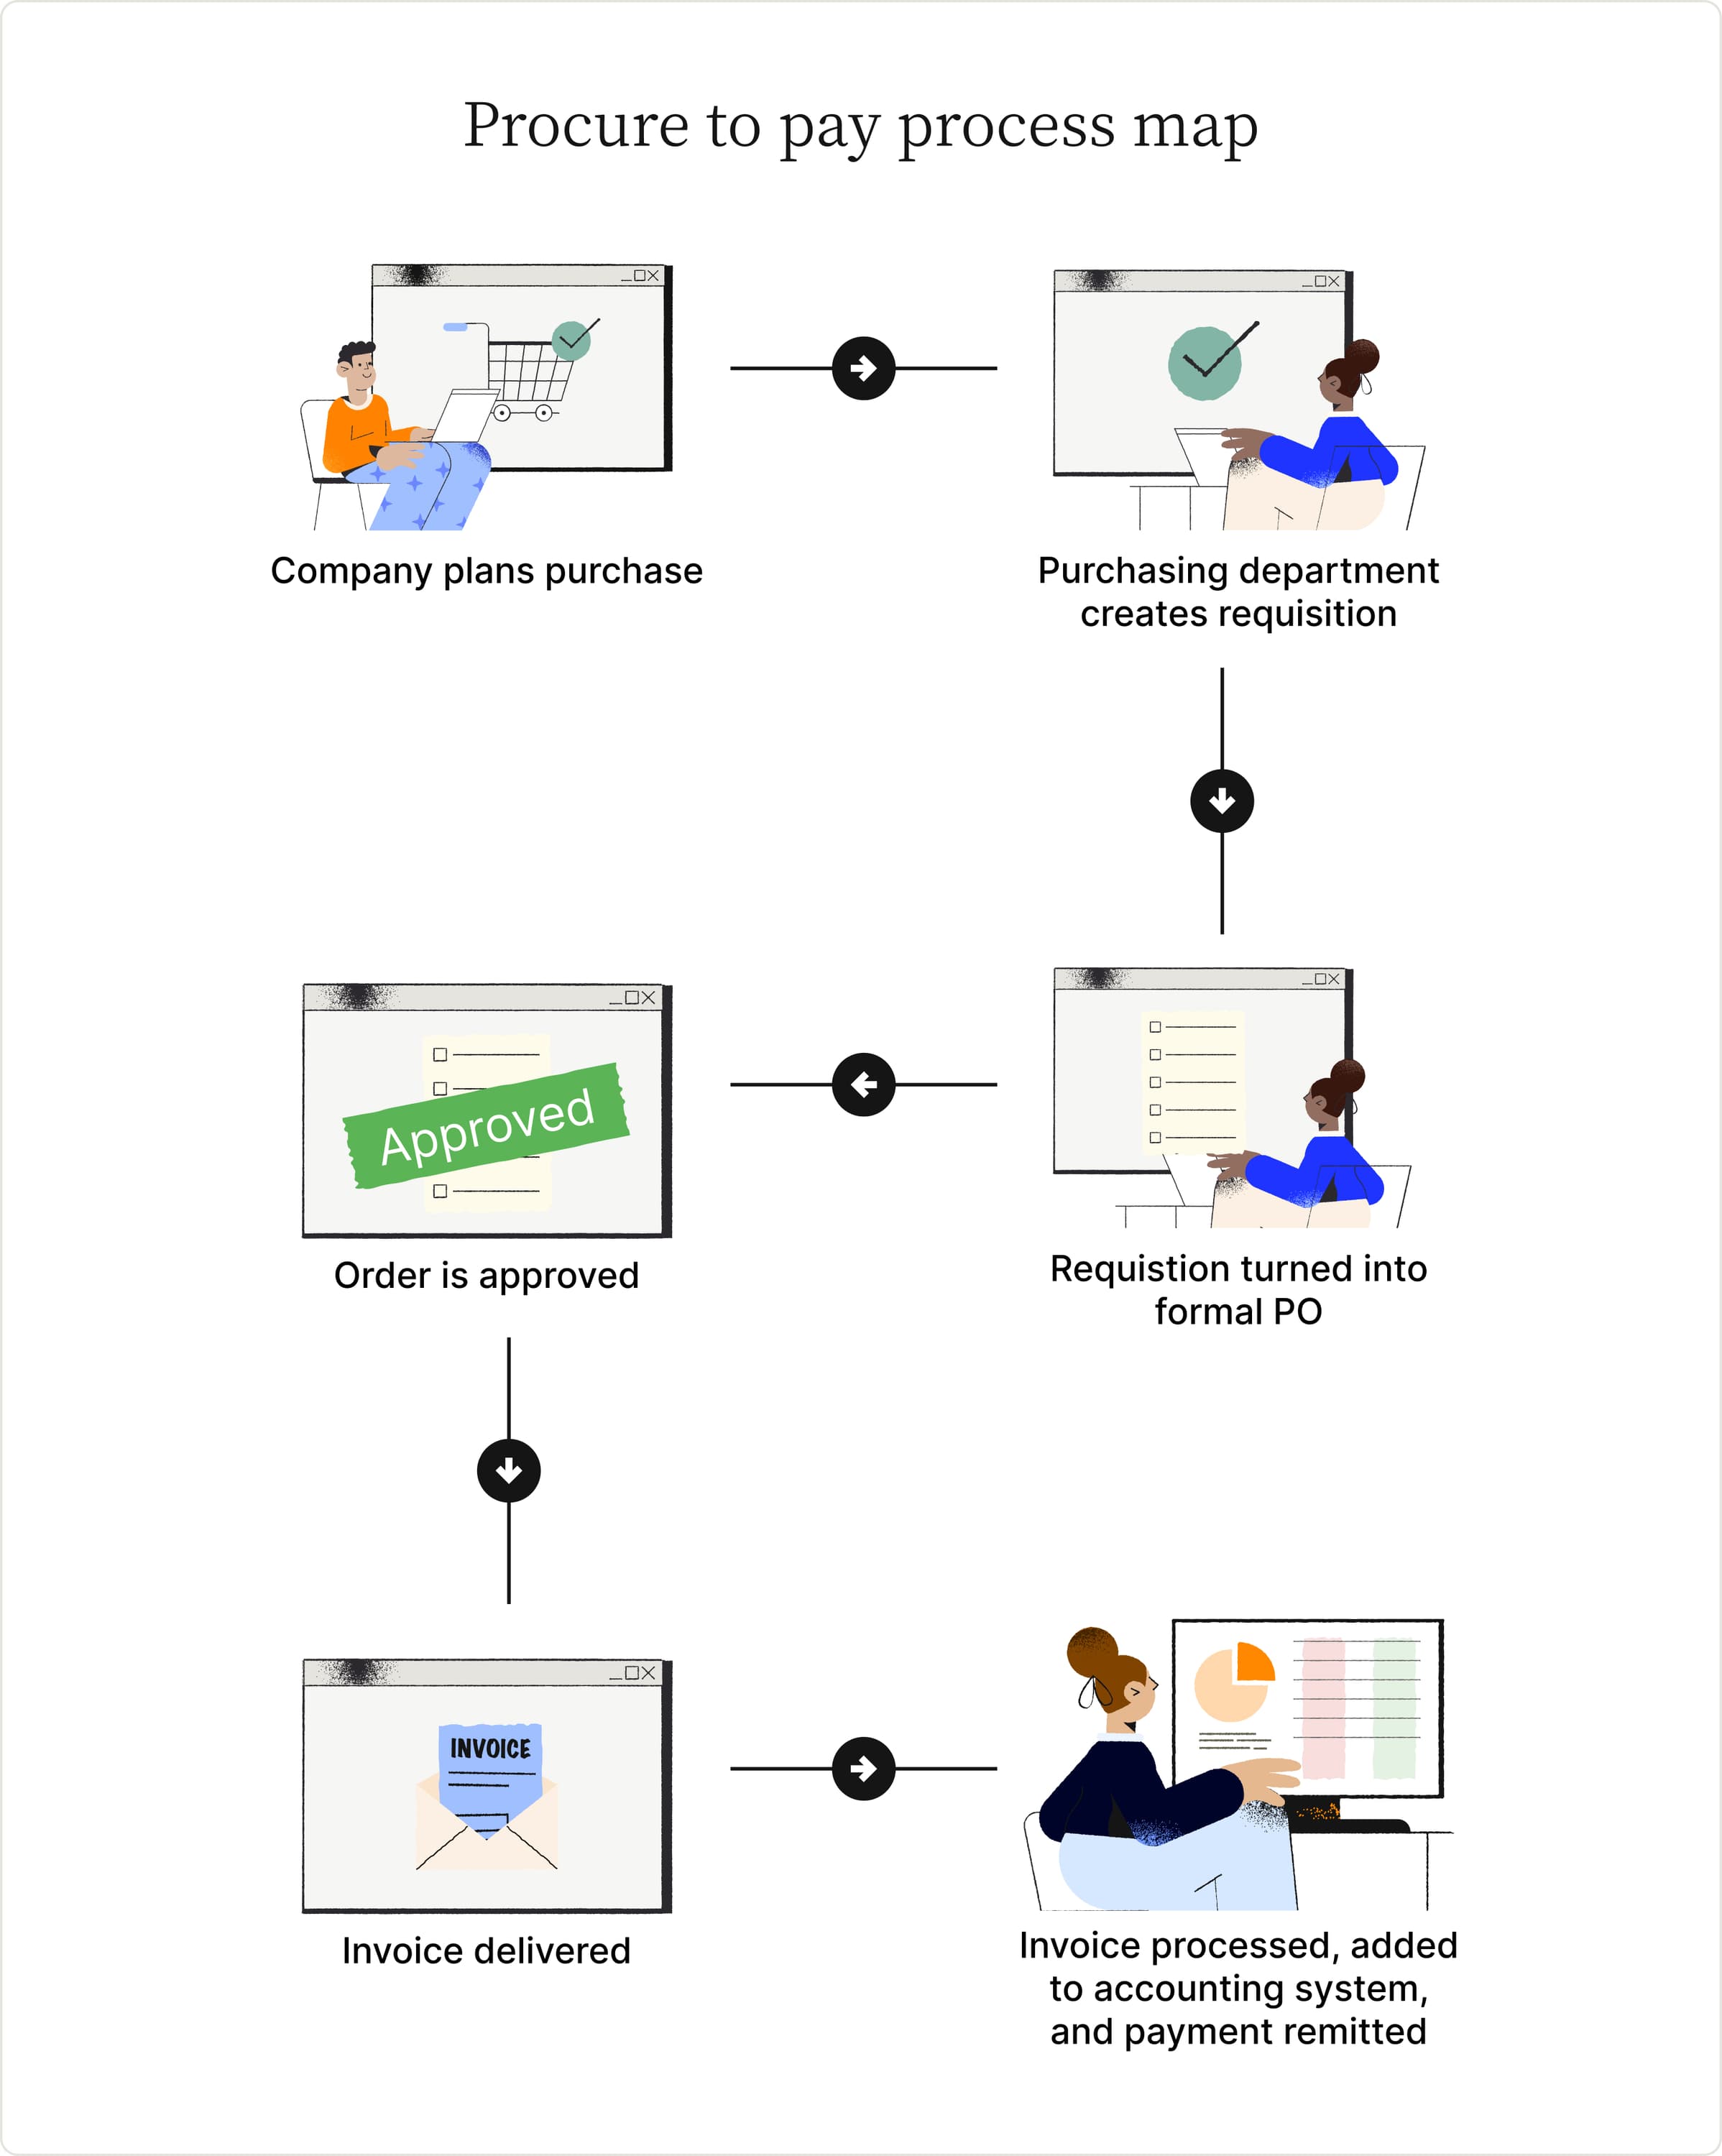 Procure to pay process map